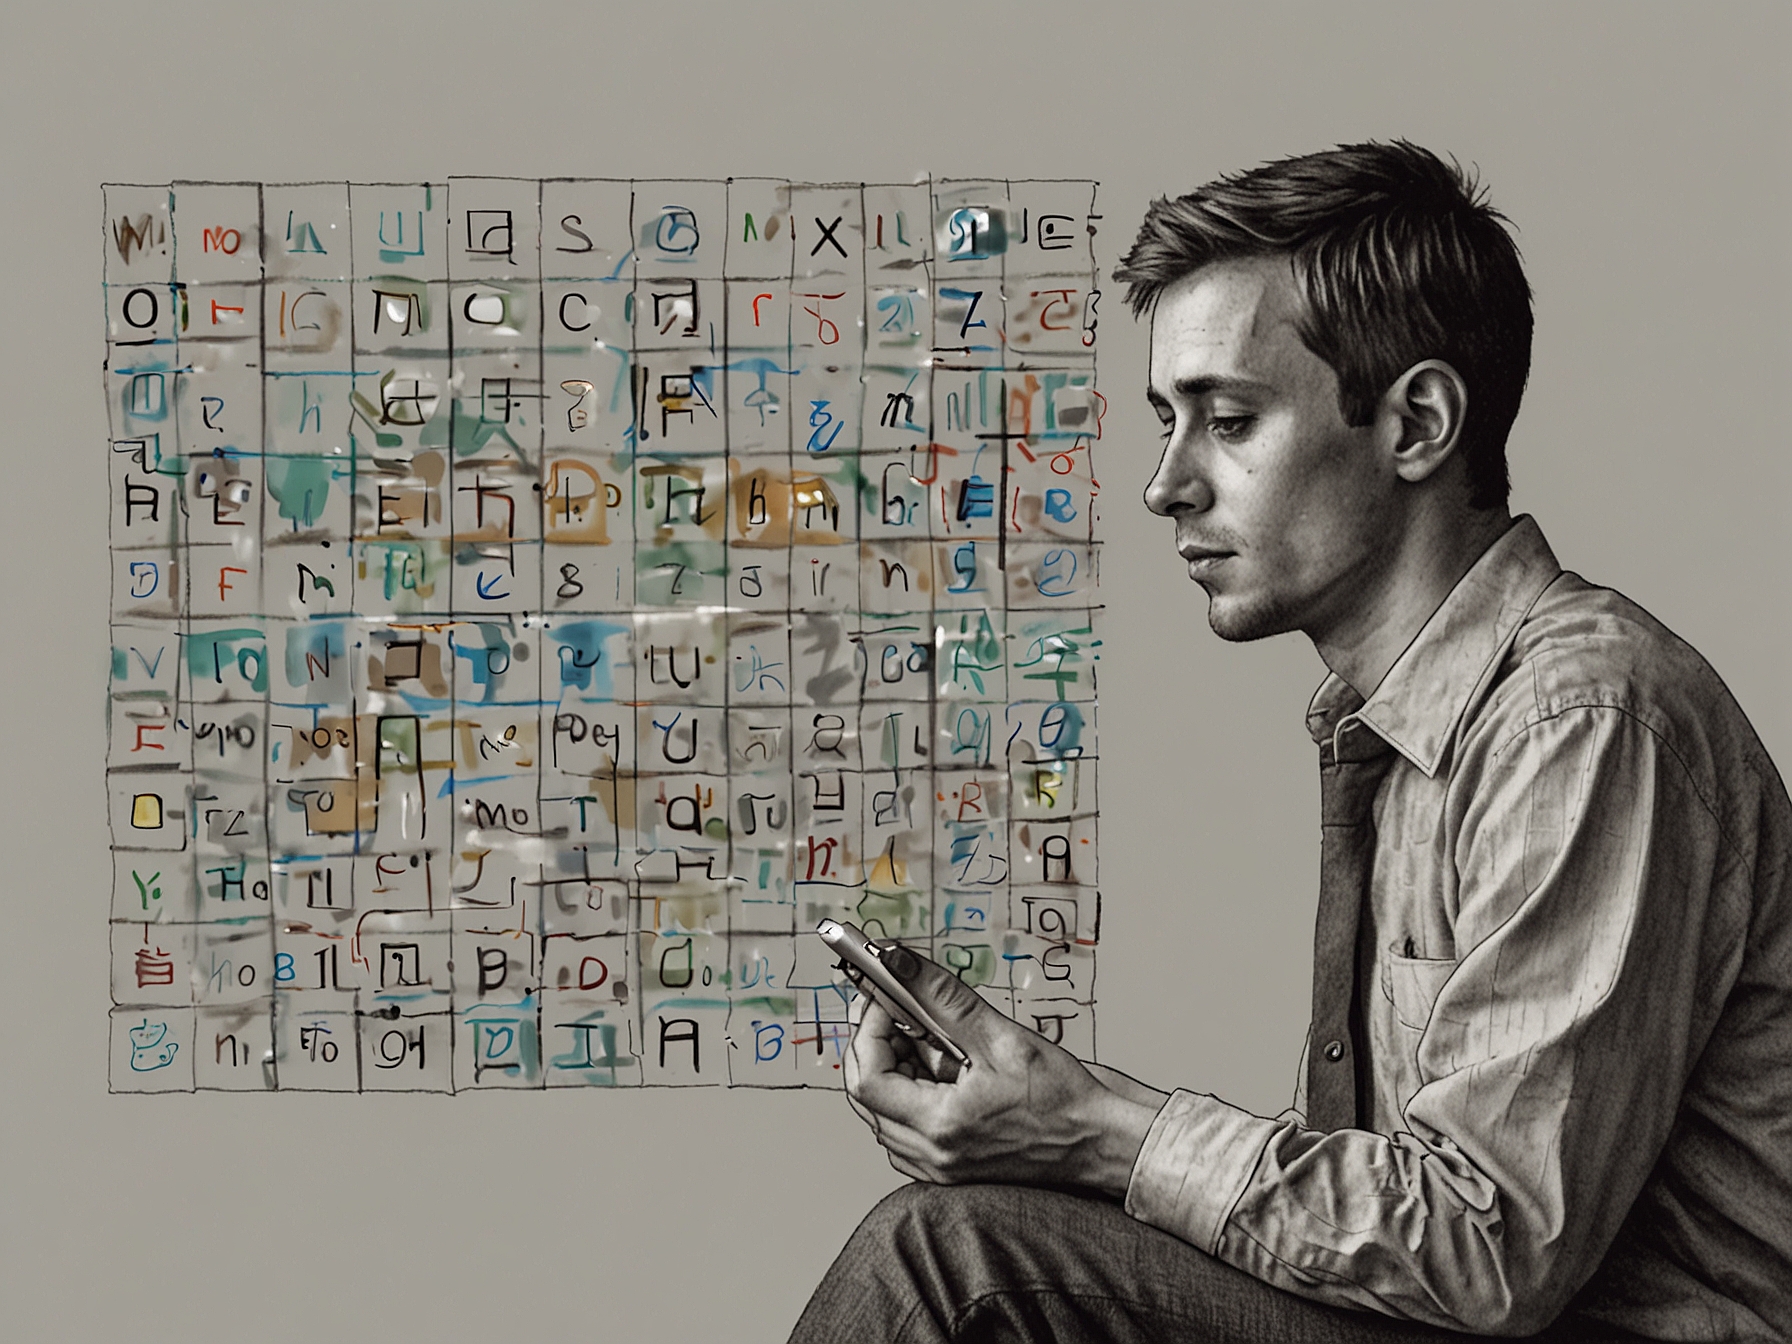 A player pondering over a word puzzle in the 'Connections' game, focusing on finding connections between seemingly unrelated words to solve the challenge.